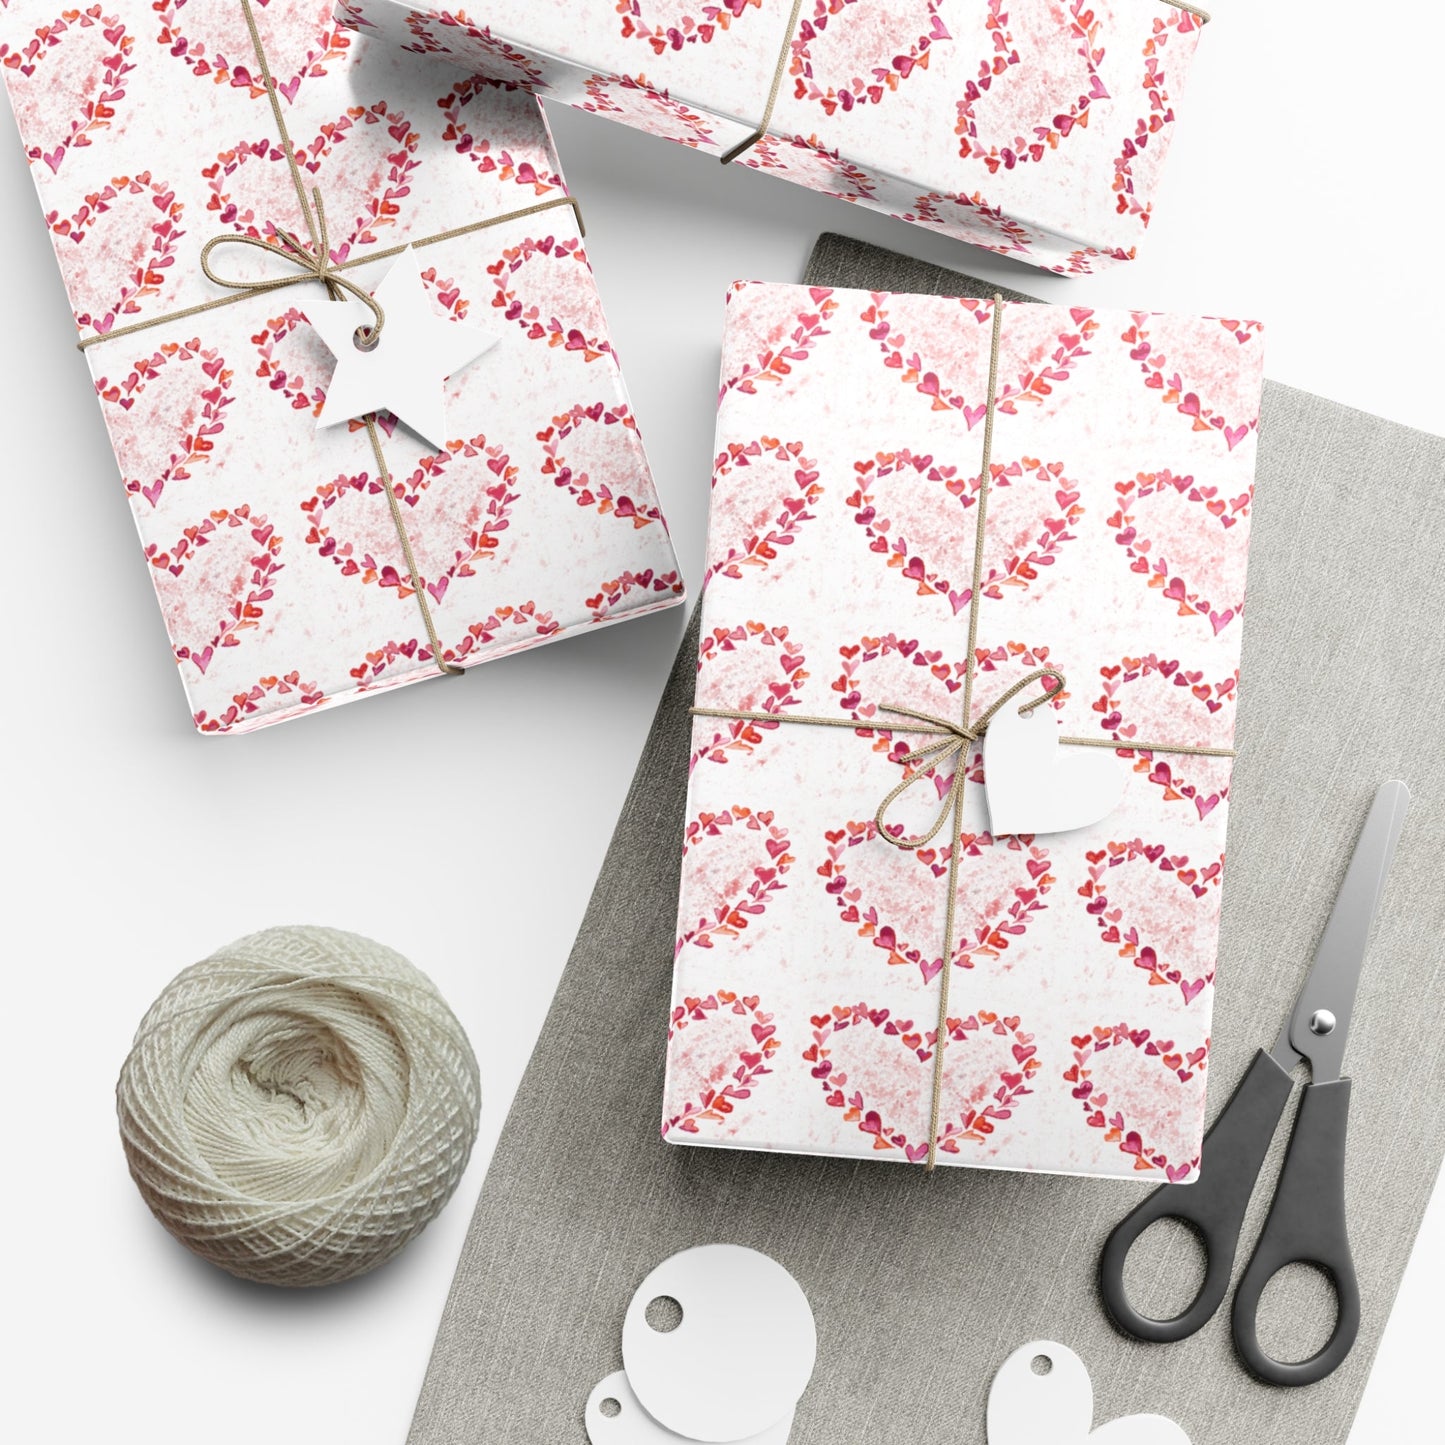 Heart of Hearts Gift Wrap Papers - Blue Cava